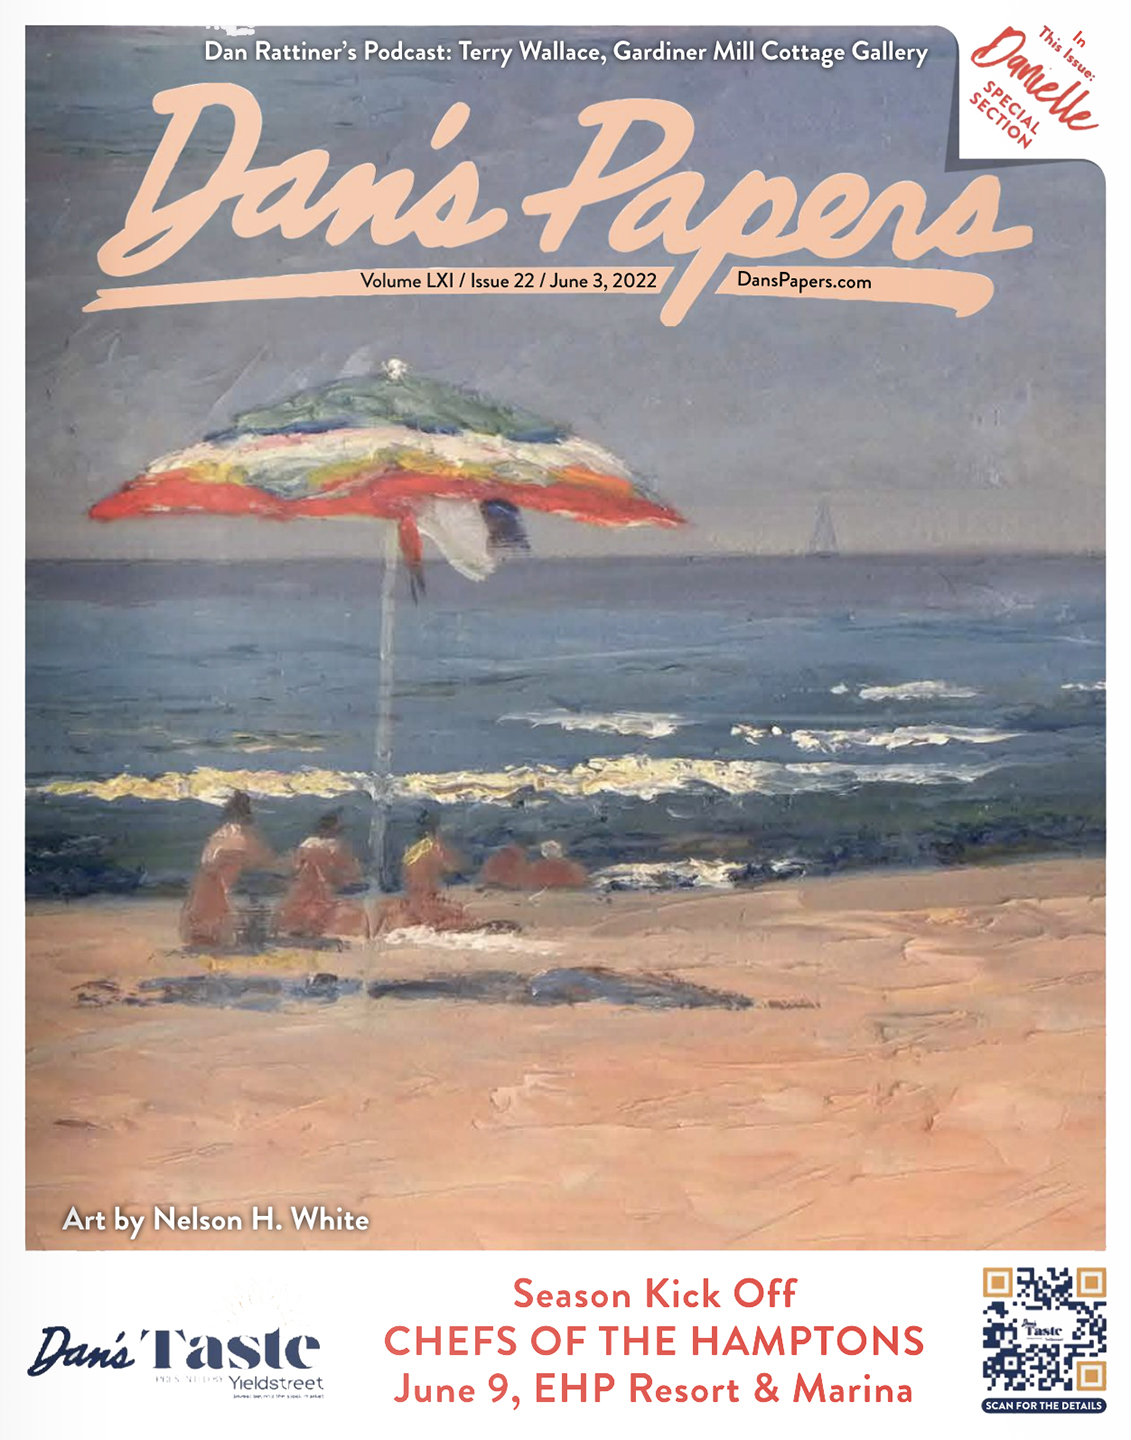 June 3, 2022 Dan's Papers cover art by Nelson H. White